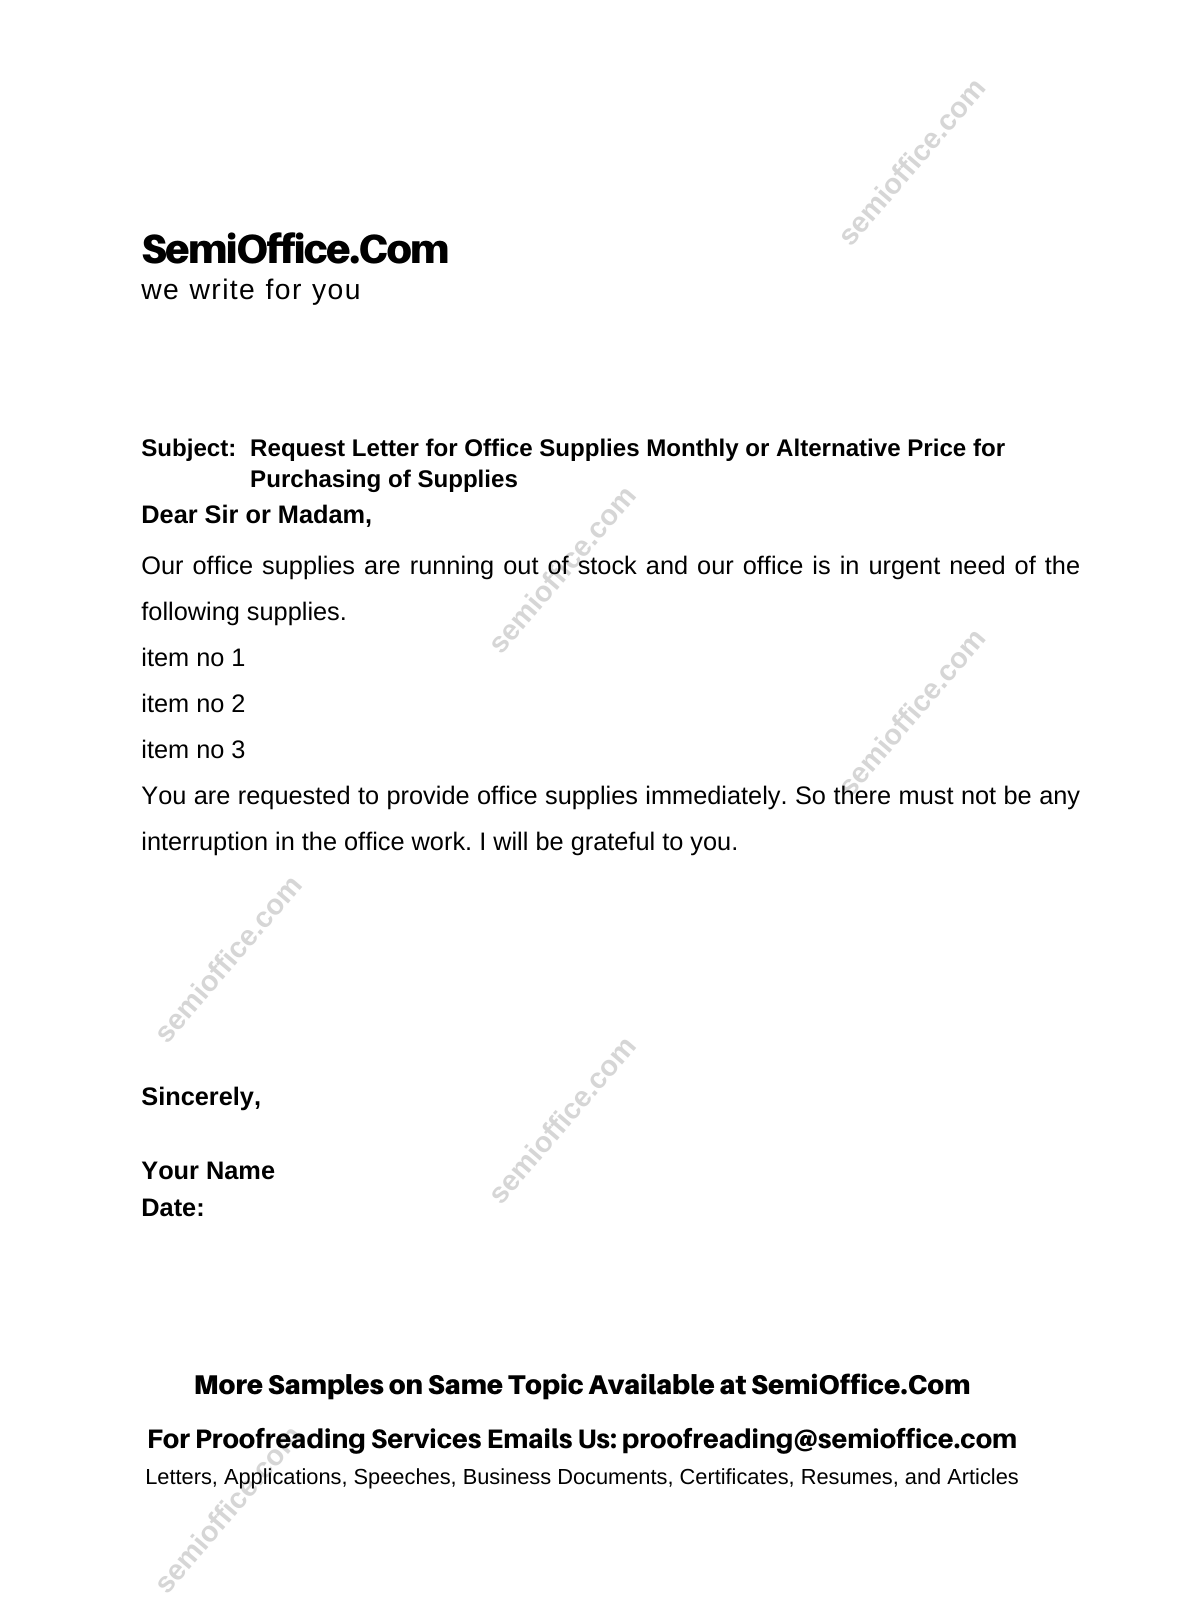 Request For Office Supplies Templates SemiOffice Com